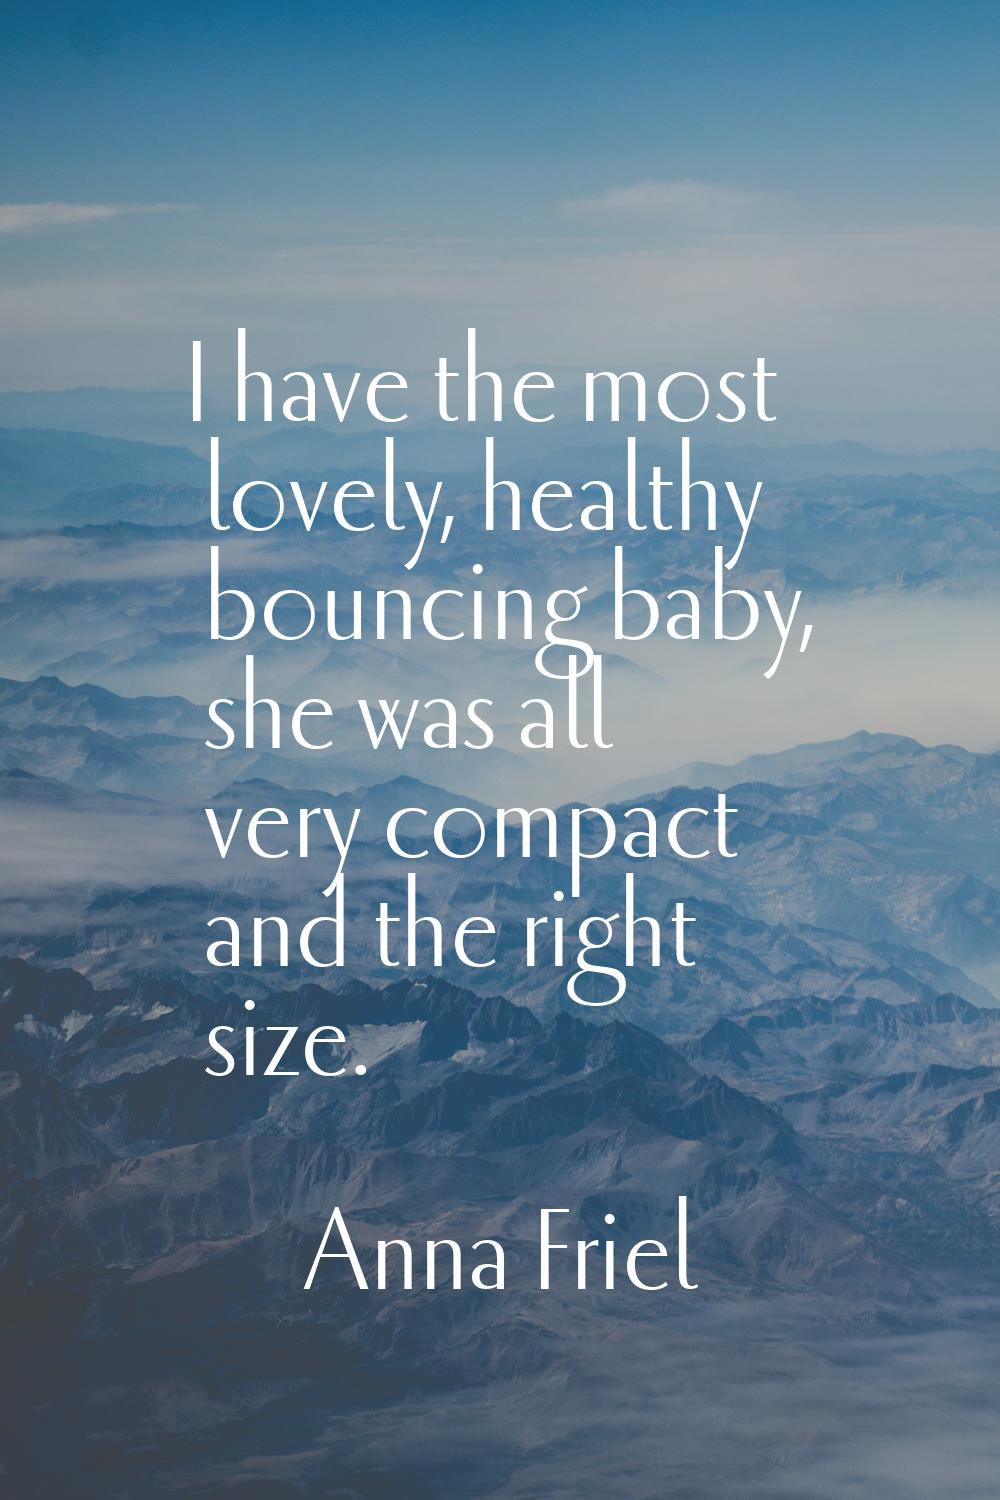 I have the most lovely, healthy bouncing baby, she was all very compact and the right size.